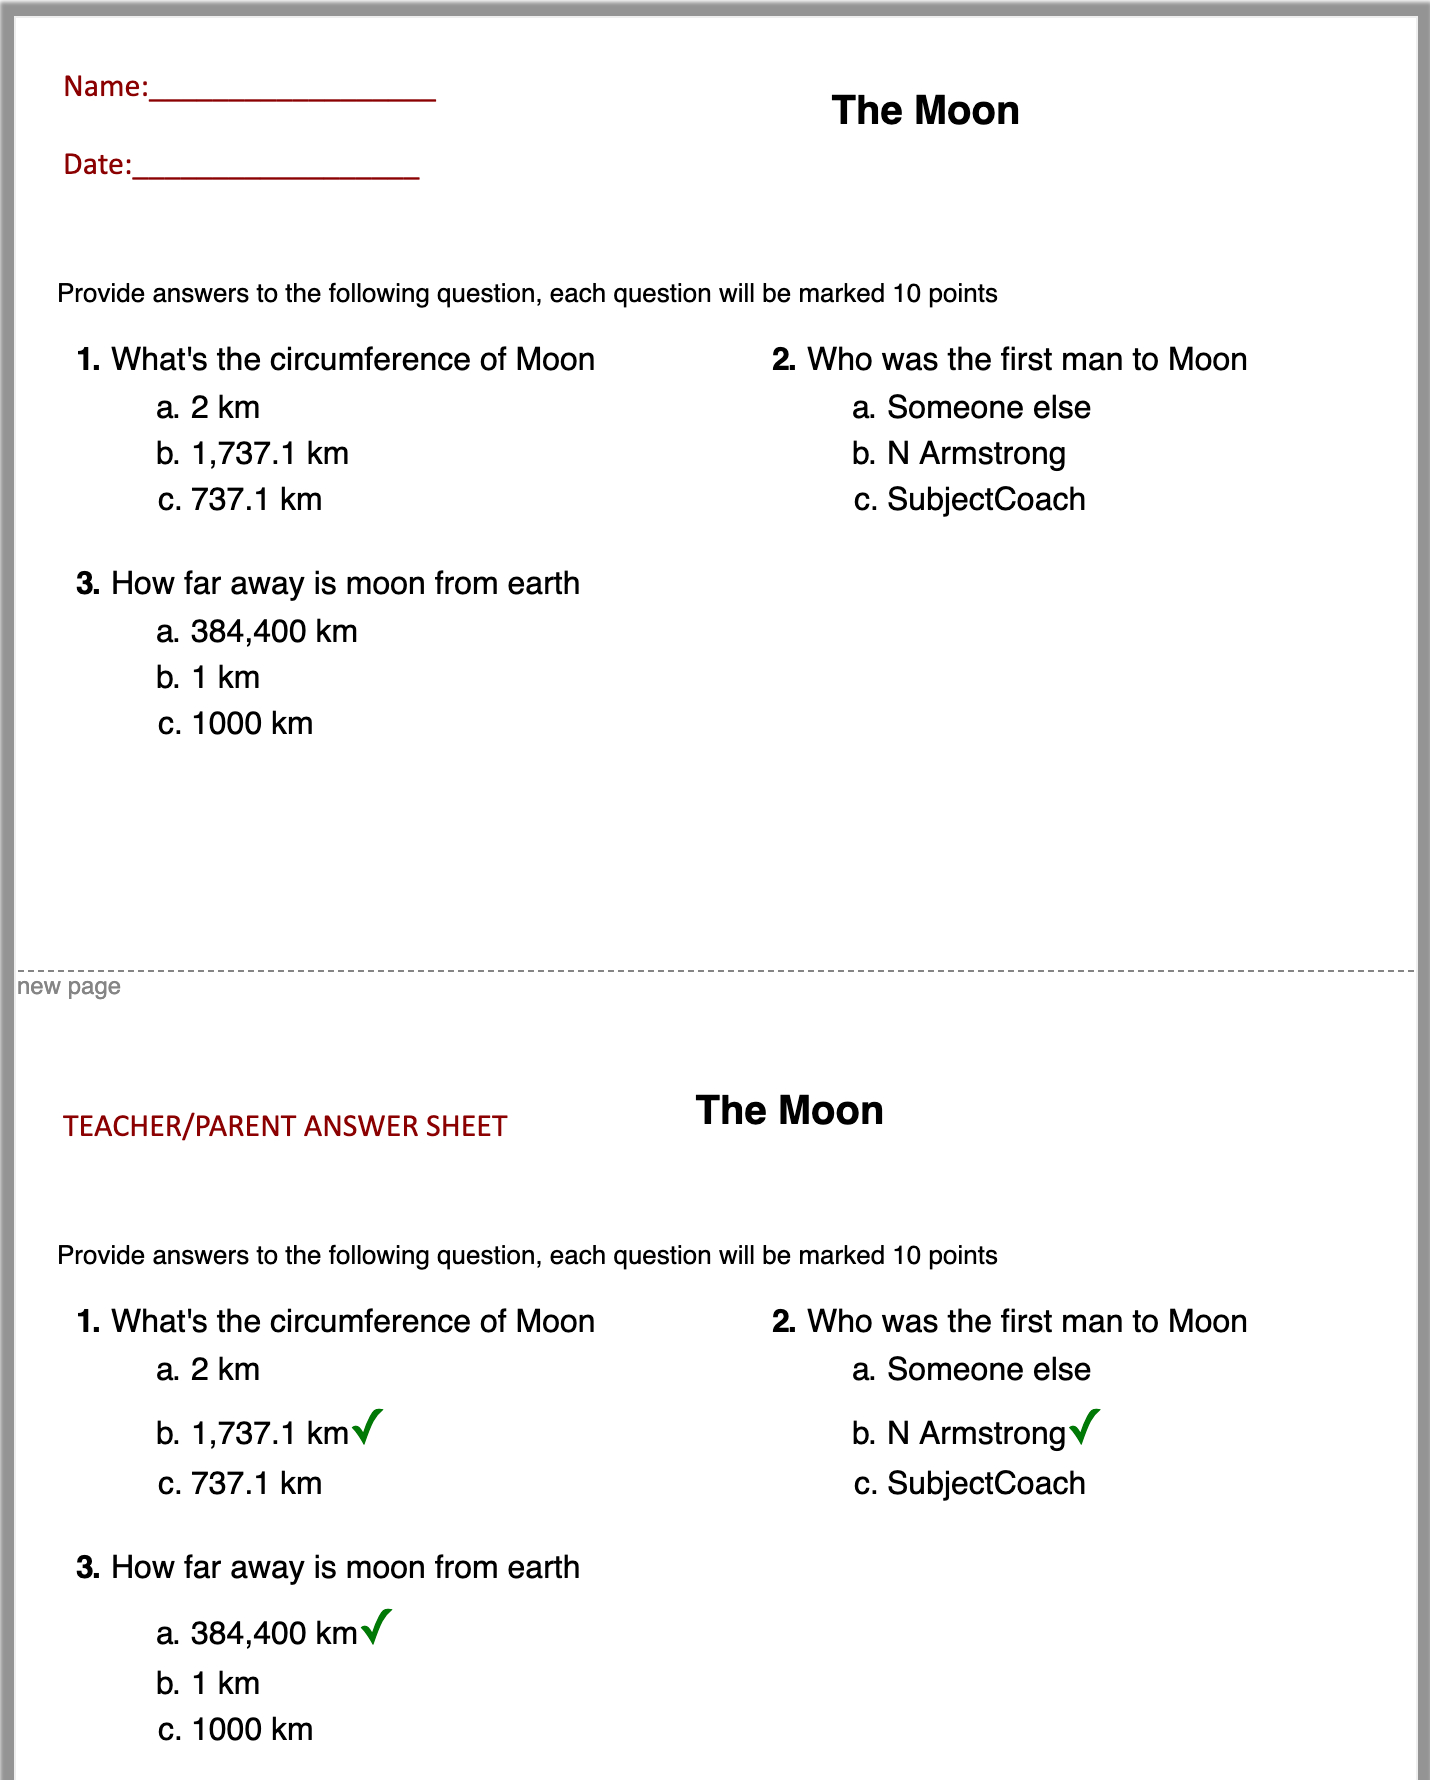 Free English Worksheet Generators For Teachers And Parents - Free Printable Test Maker For Teachers